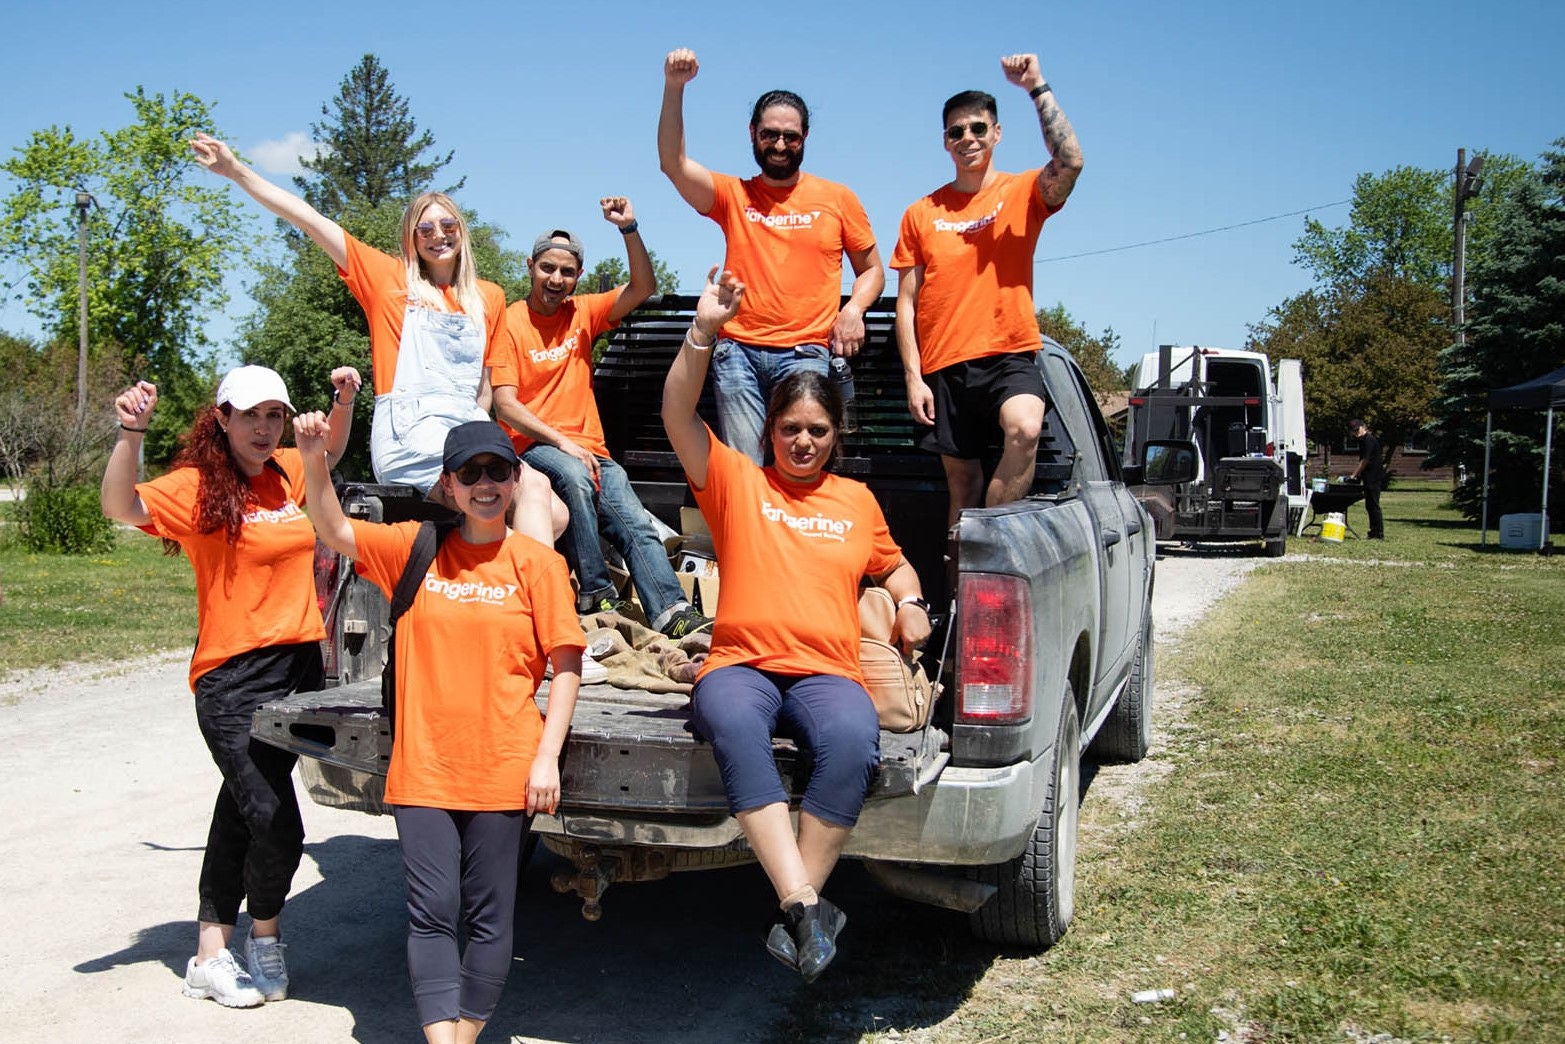 A group of Tangerine employees with their hands up in the air behind a pickup truck.